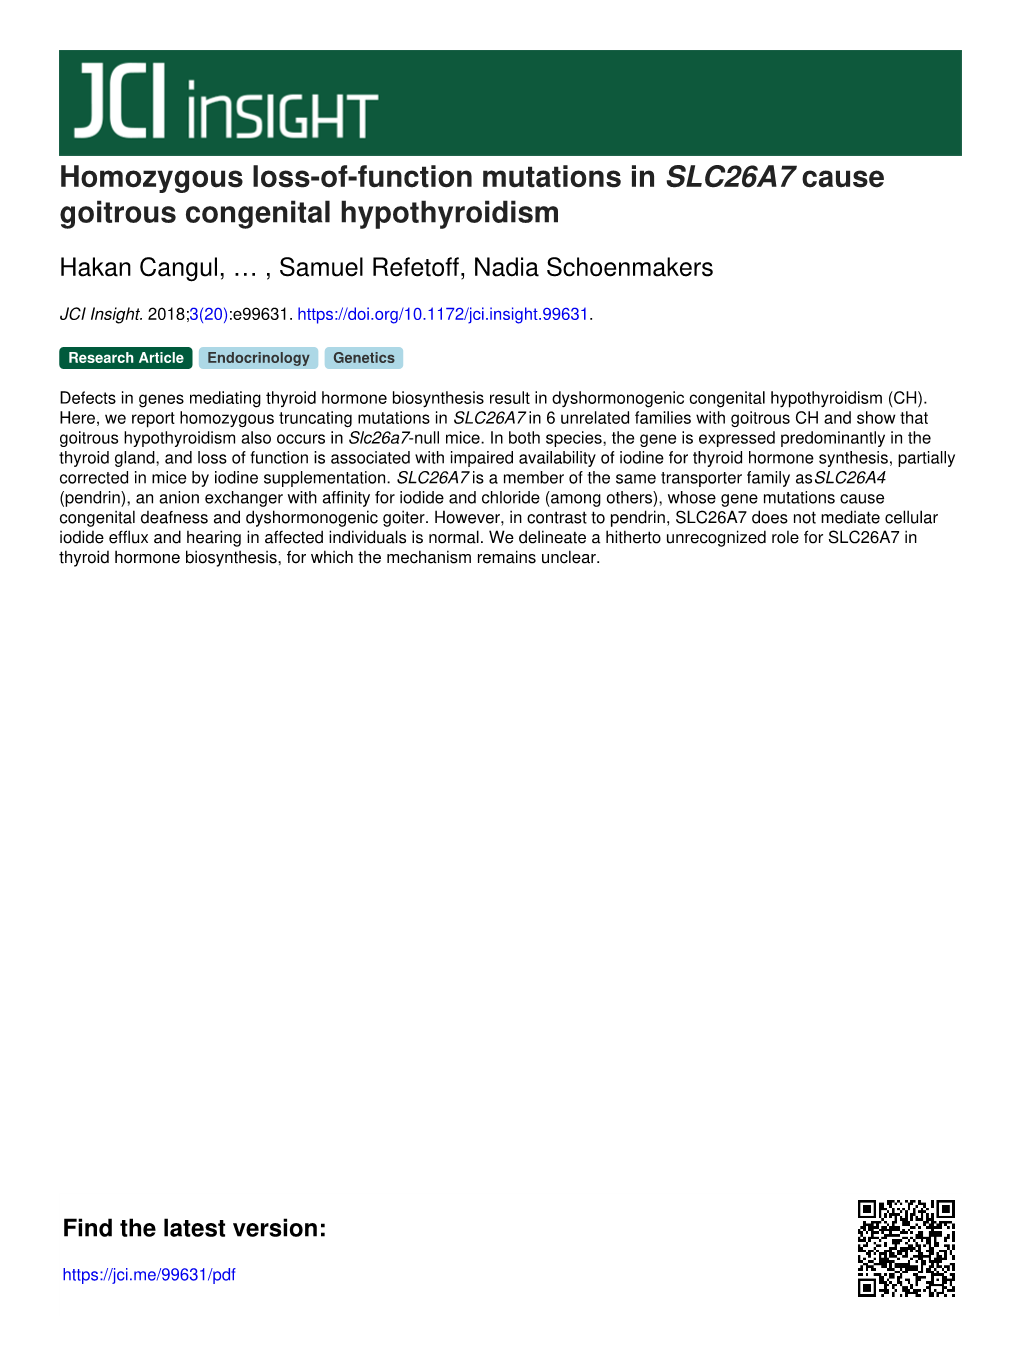 Homozygous Loss-Of-Function Mutations in SLC26A7 Cause Goitrous Congenital Hypothyroidism